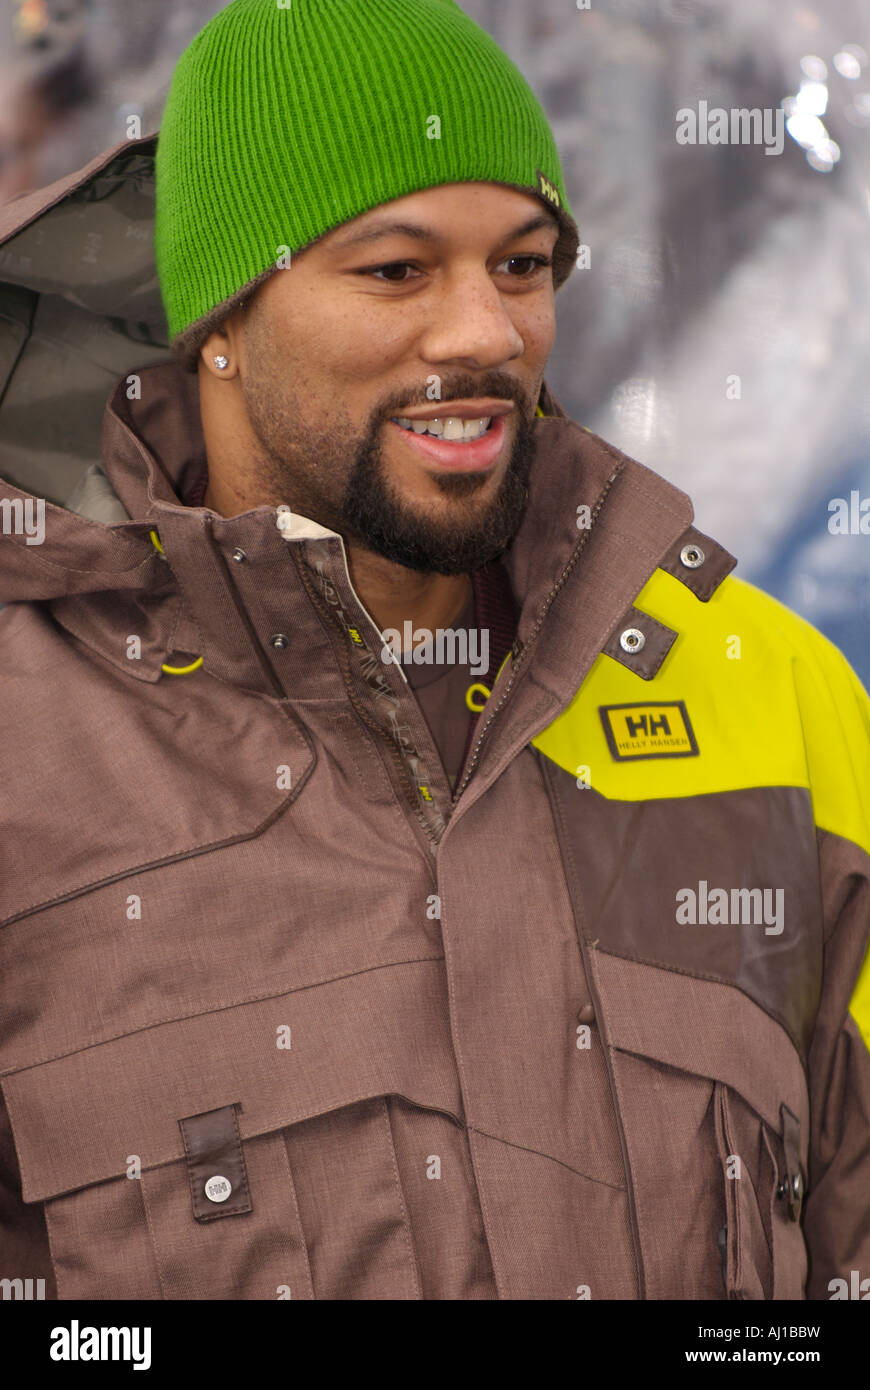 Grammy Award Winning Rapper Common at the 2007 ESPN Winter X Games 11 Snowboard Slopestyle Medal Ceremony Stock Photo